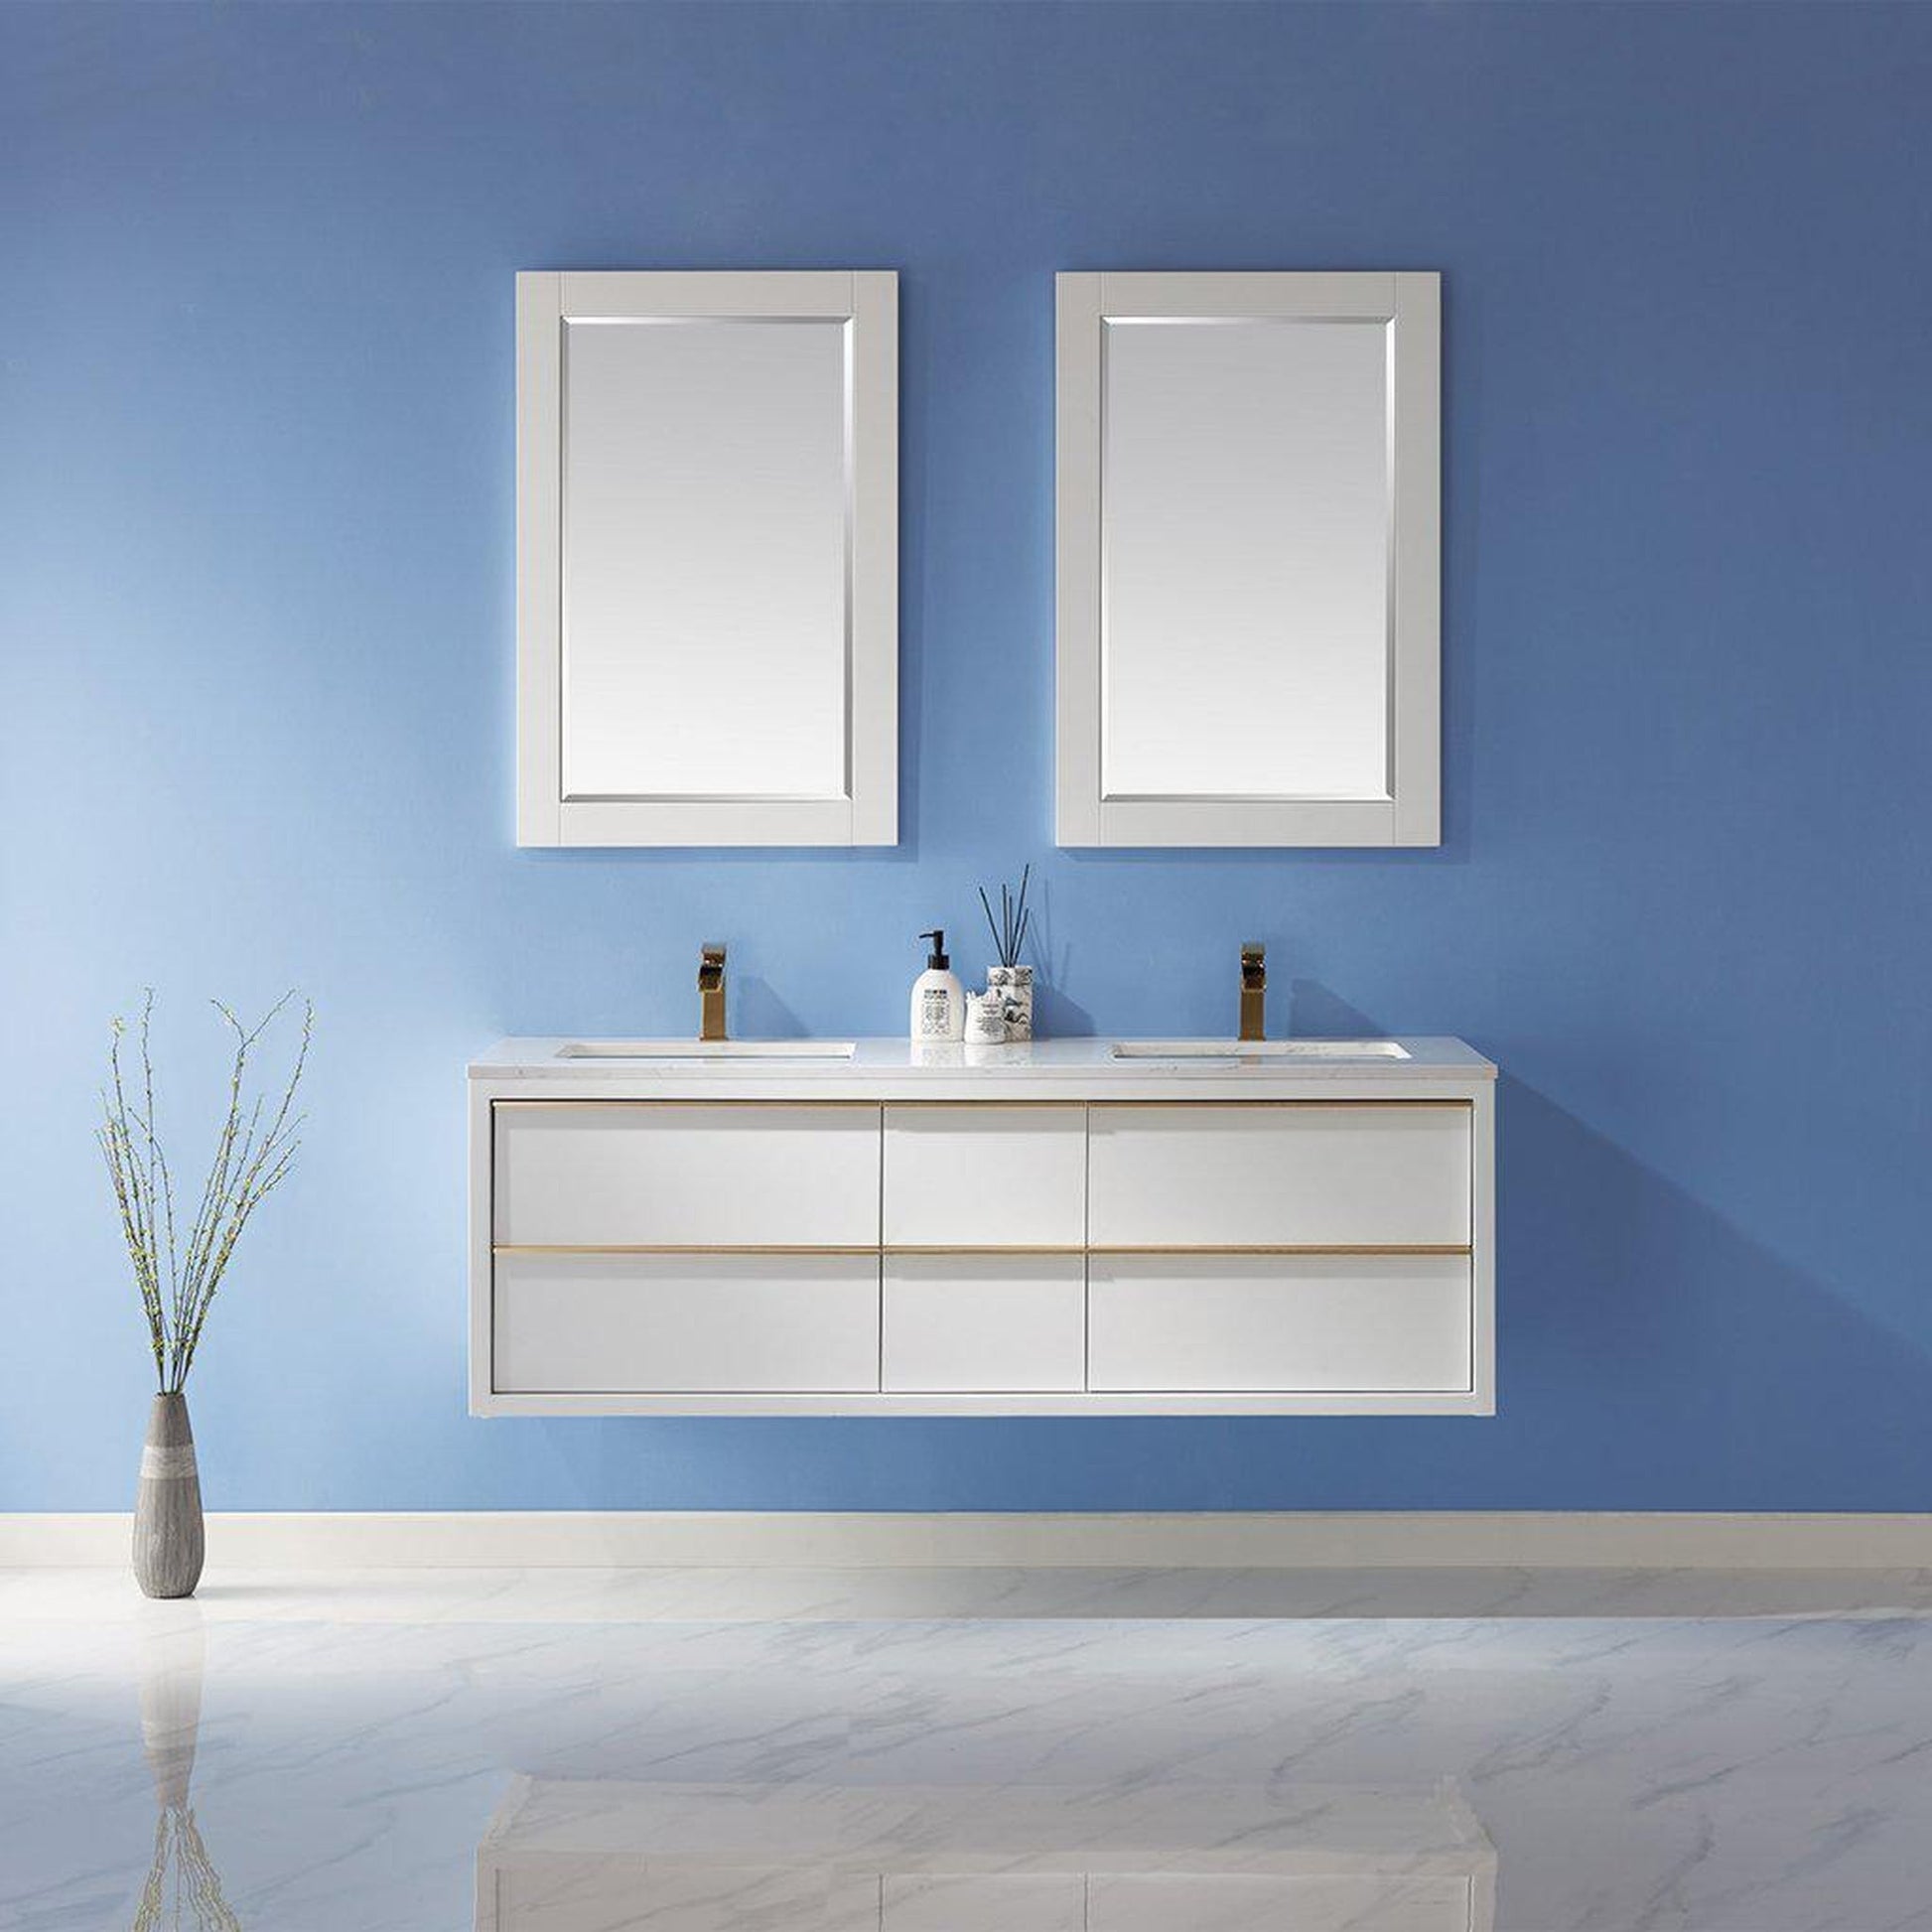 Altair Morgan 60" Double White Wall-Mounted Bathroom Vanity Set With Mirror, Aosta White Composite Stone Top, Two Rectangular Undermount Ceramic Sinks, and Overflow